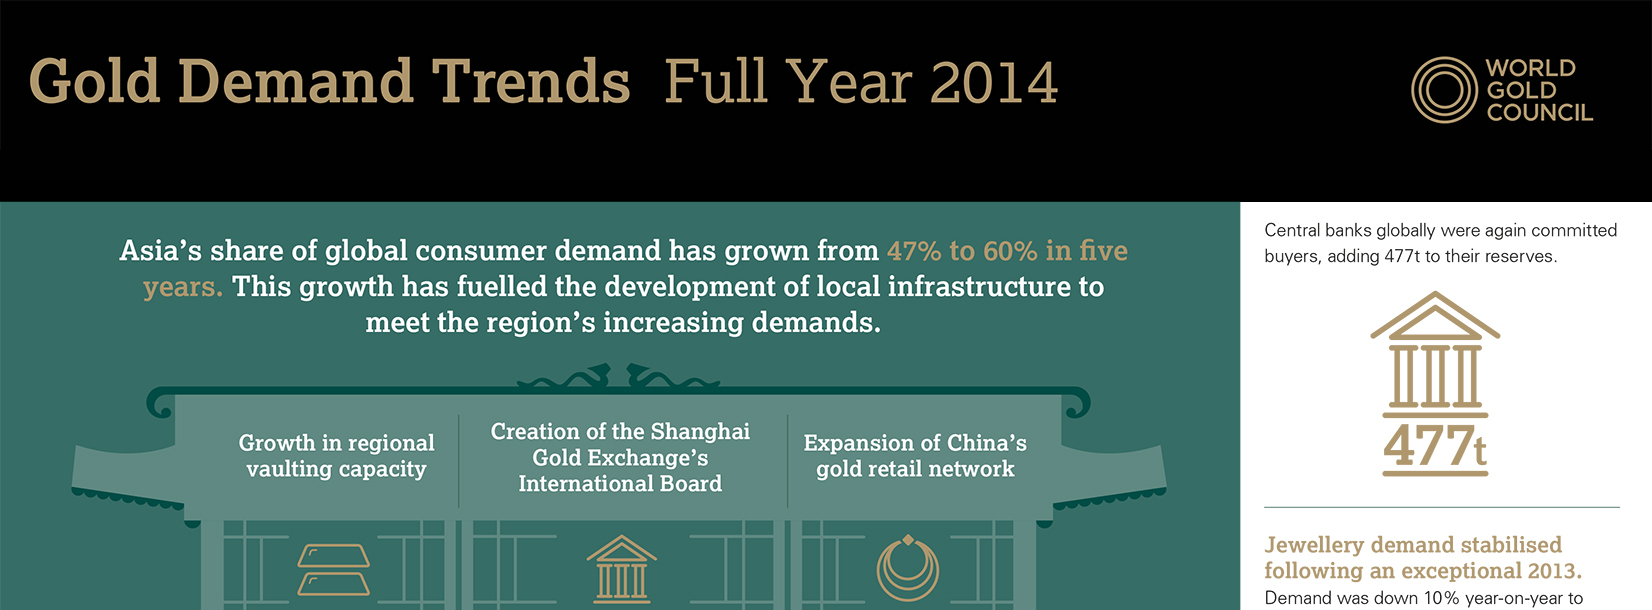 World Gold Council Gold Demand Trends: 2014 Full Year Report